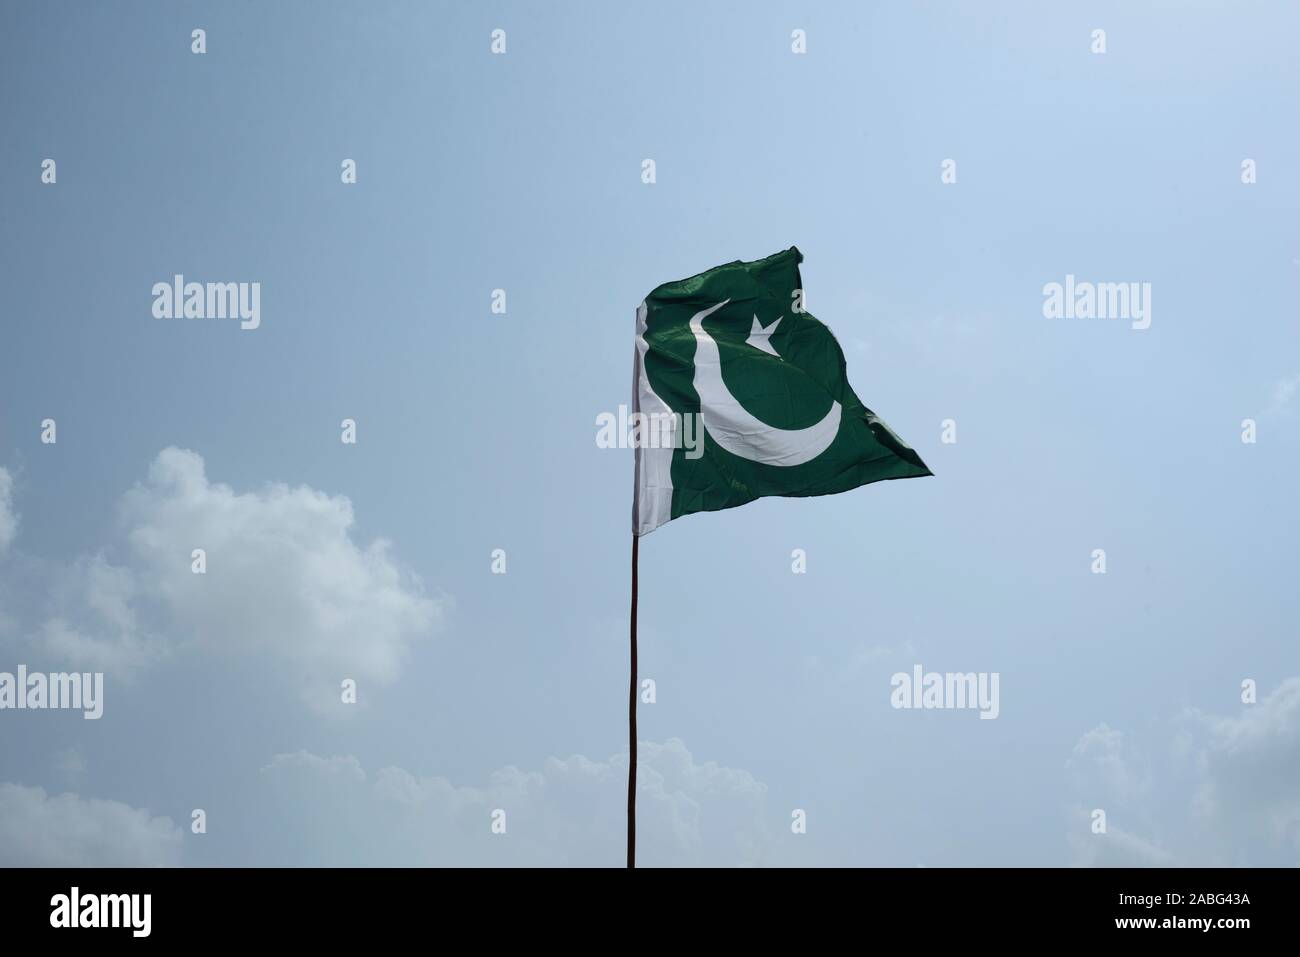 The national flag of Pakistan flying in the blue sky with clouds Stock Photo